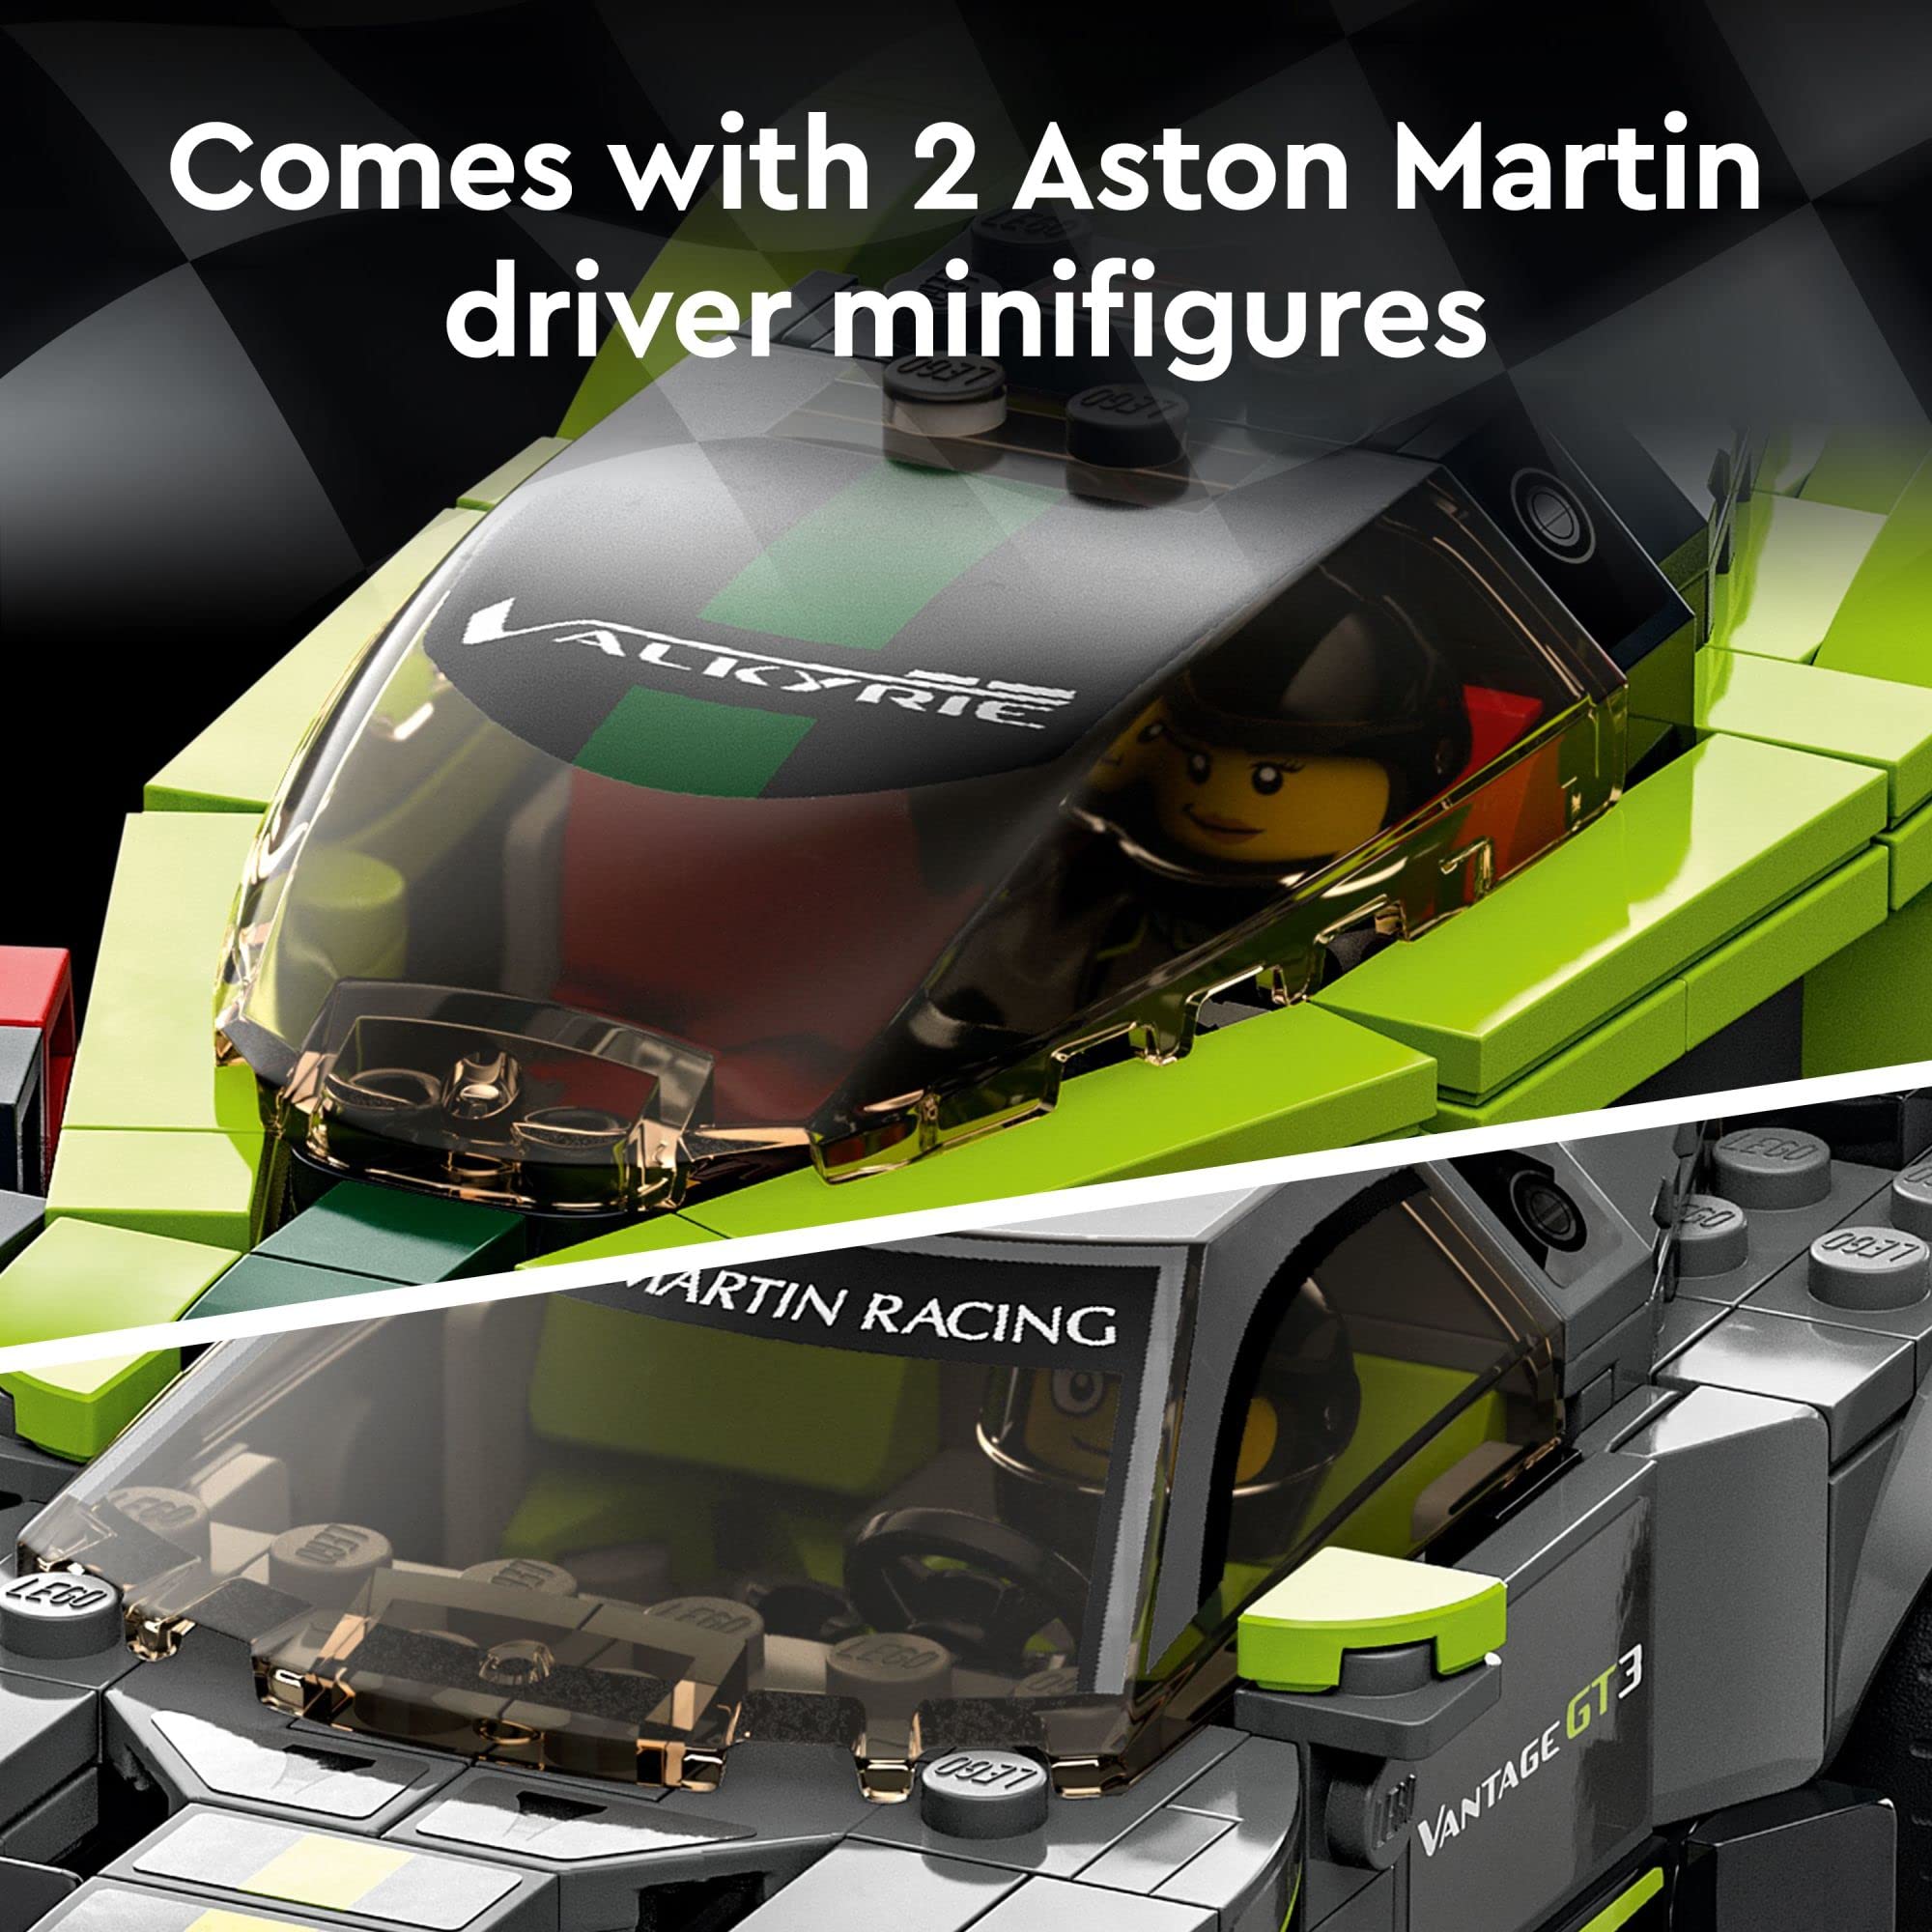 LEGO Speed Champions Aston Martin Valkyrie AMR Pro and Aston Martin Vantage GT3 76910 Building Kit for Kids Aged 9+ (592 Pieces) (Like New, Open Box)